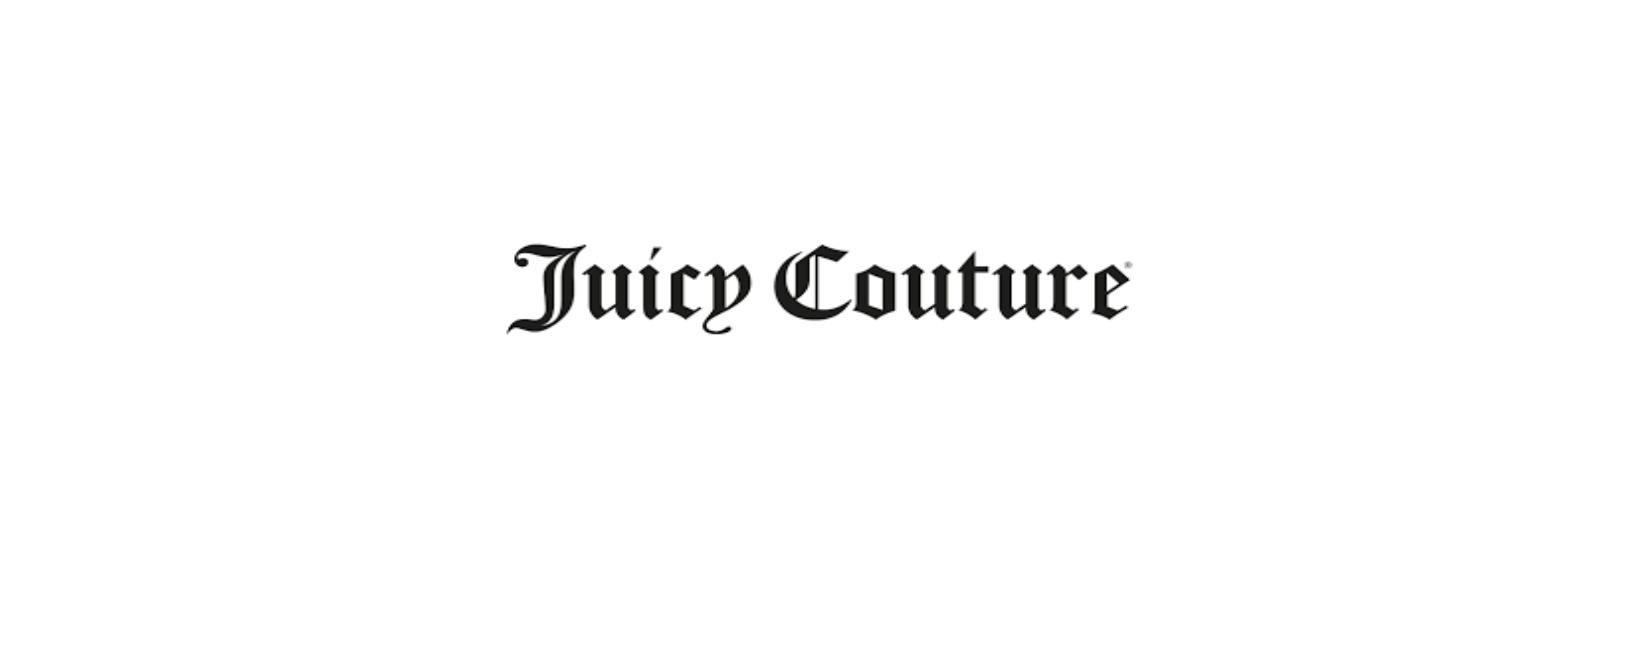 Juicy Couture Viva La Juicy: Review of a Classic Fragrance